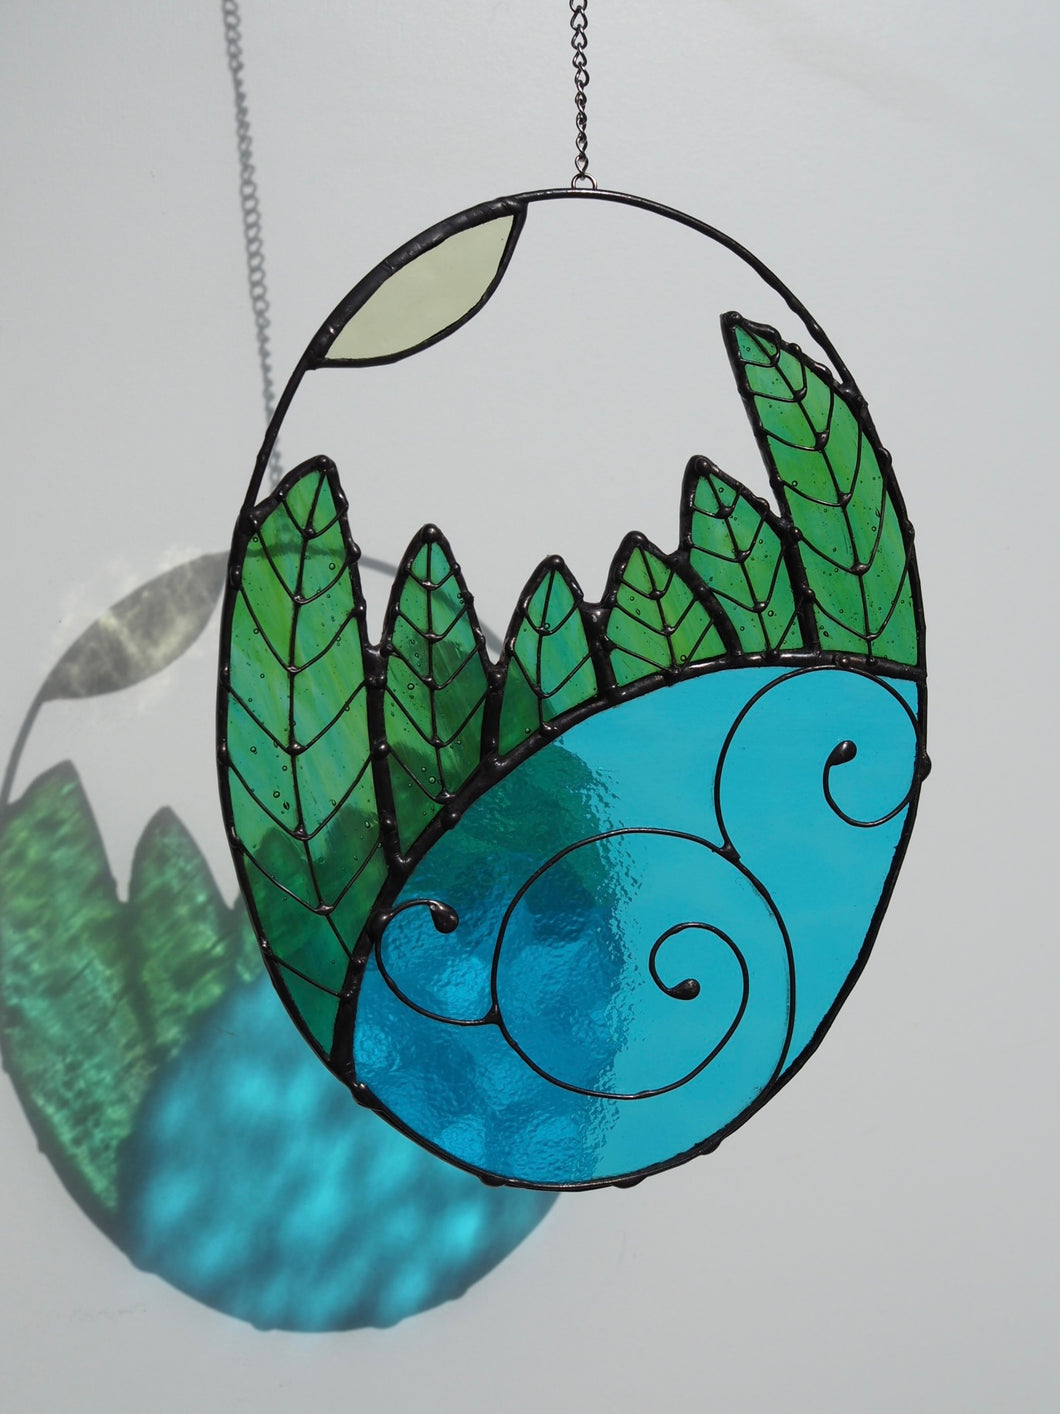 Stained Glass, Suncatcher, Nature's energy, handmade, gift ideas, lead-free solder, trees, water, sun, good energy, Made in Australia, handcrafted, ocean themed, good vibe, Sydney